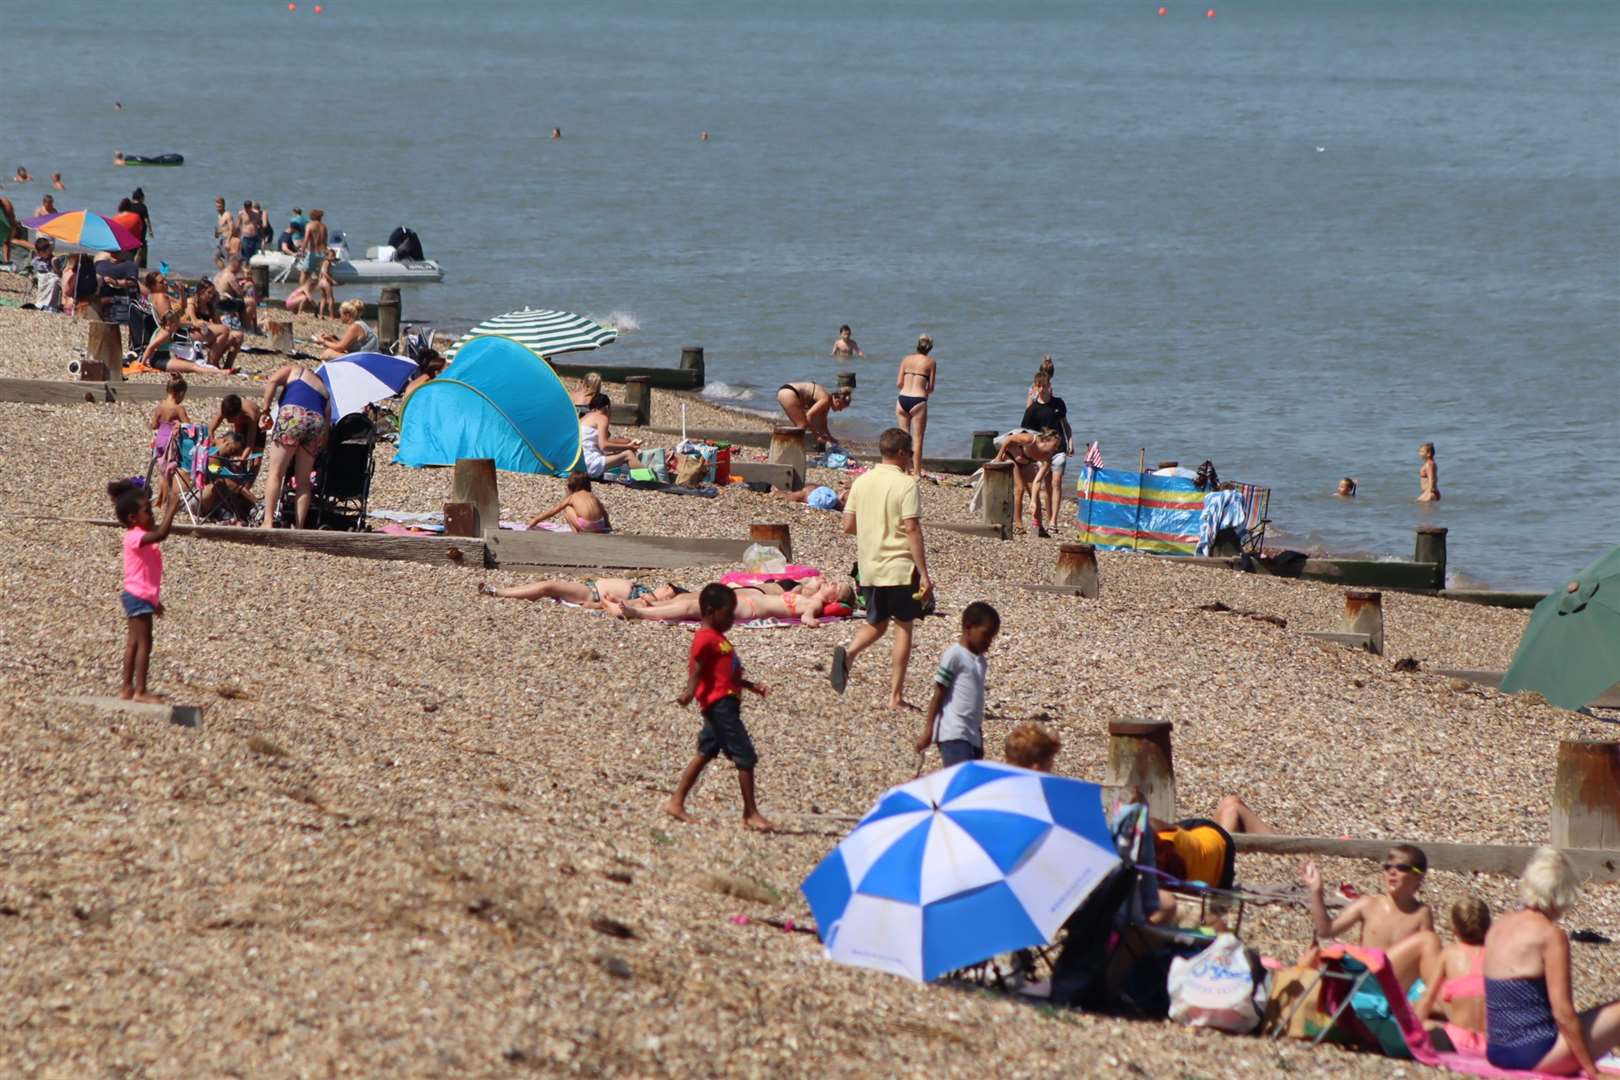 Southern and eastern areas have been enjoying a heatwave this week